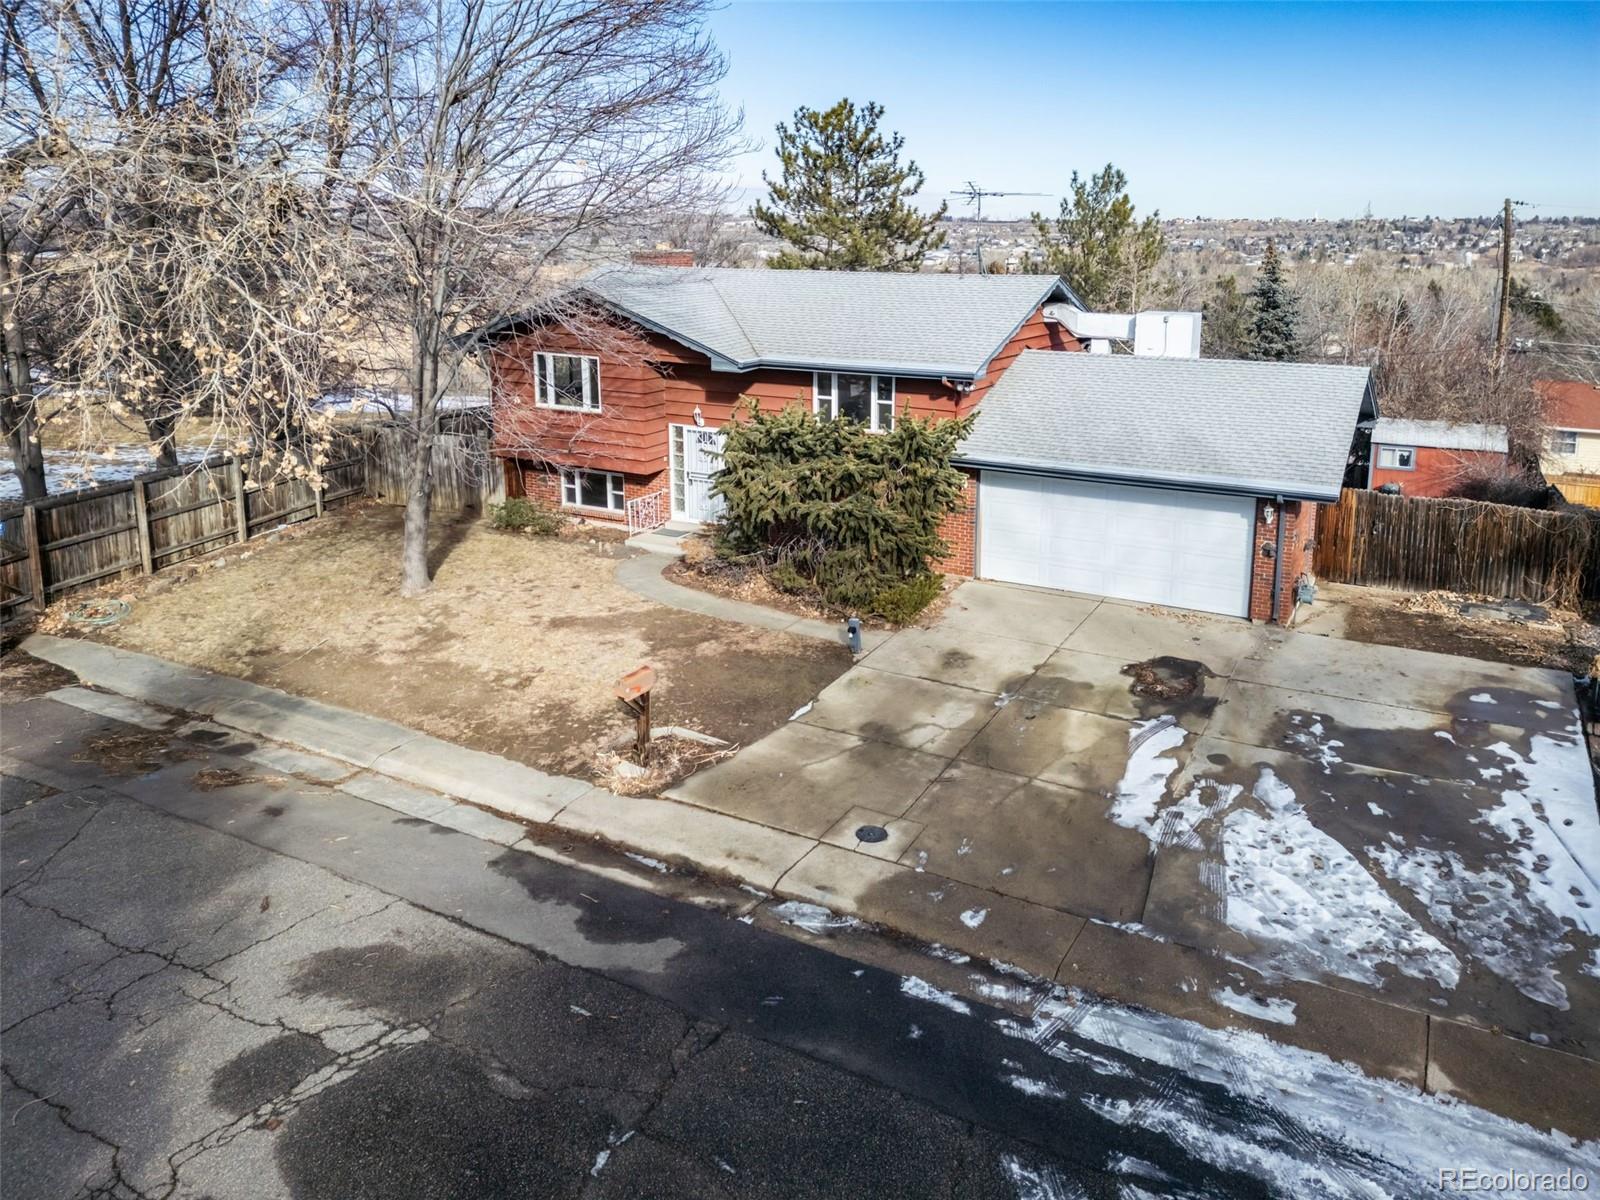 12477 w 67th avenue, Arvada sold home. Closed on 2024-02-16 for $550,000.